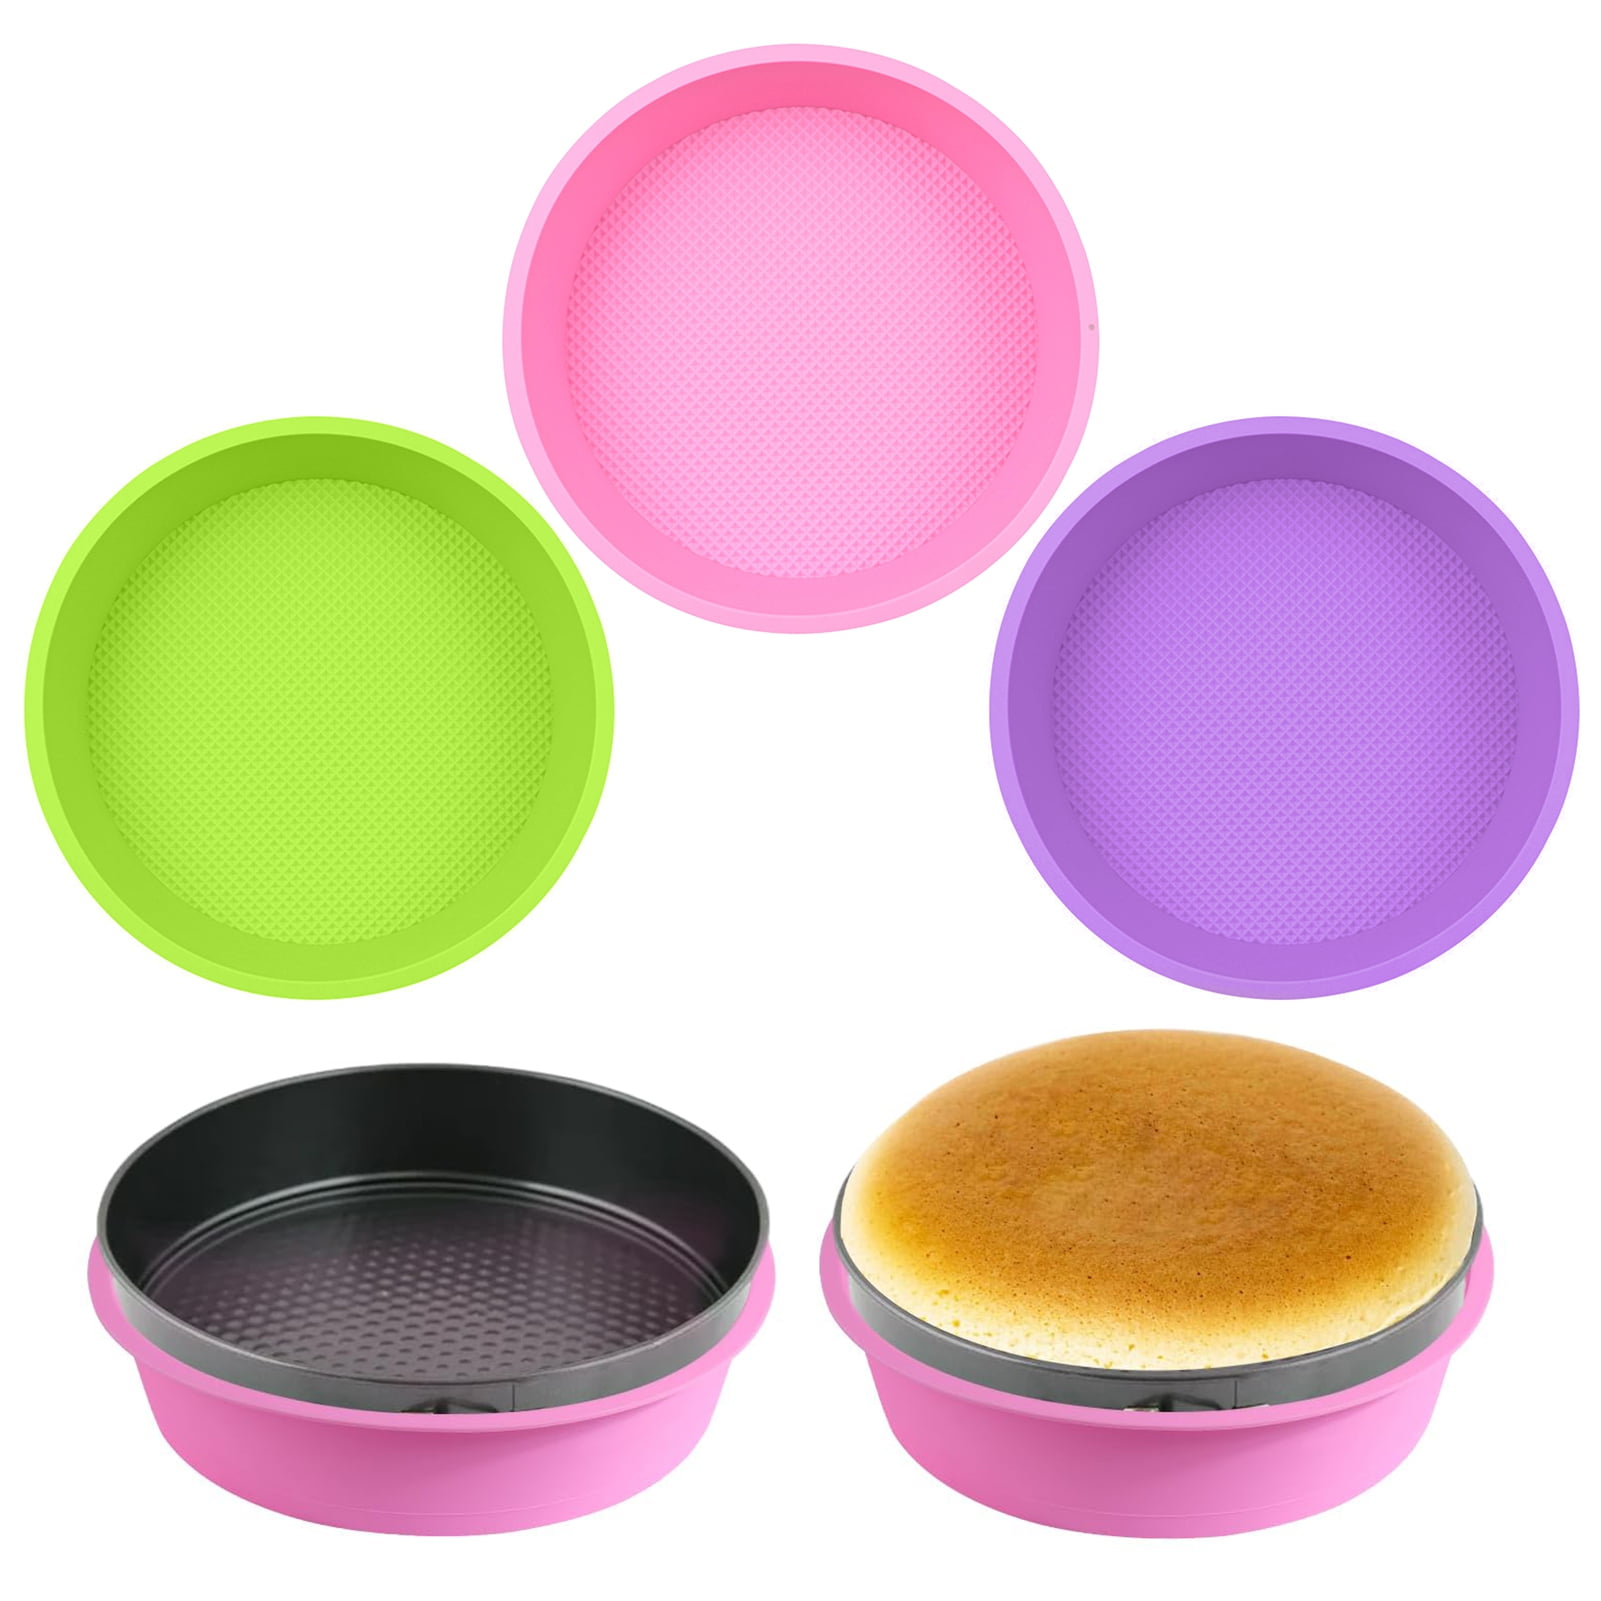 XANGNIER Cheesecake Pan Protector for 9,9.5 Inch Round Springform  Pan,Silicone Cheesecake Water Bath Pan,Preventing Water from Entering the  Spring